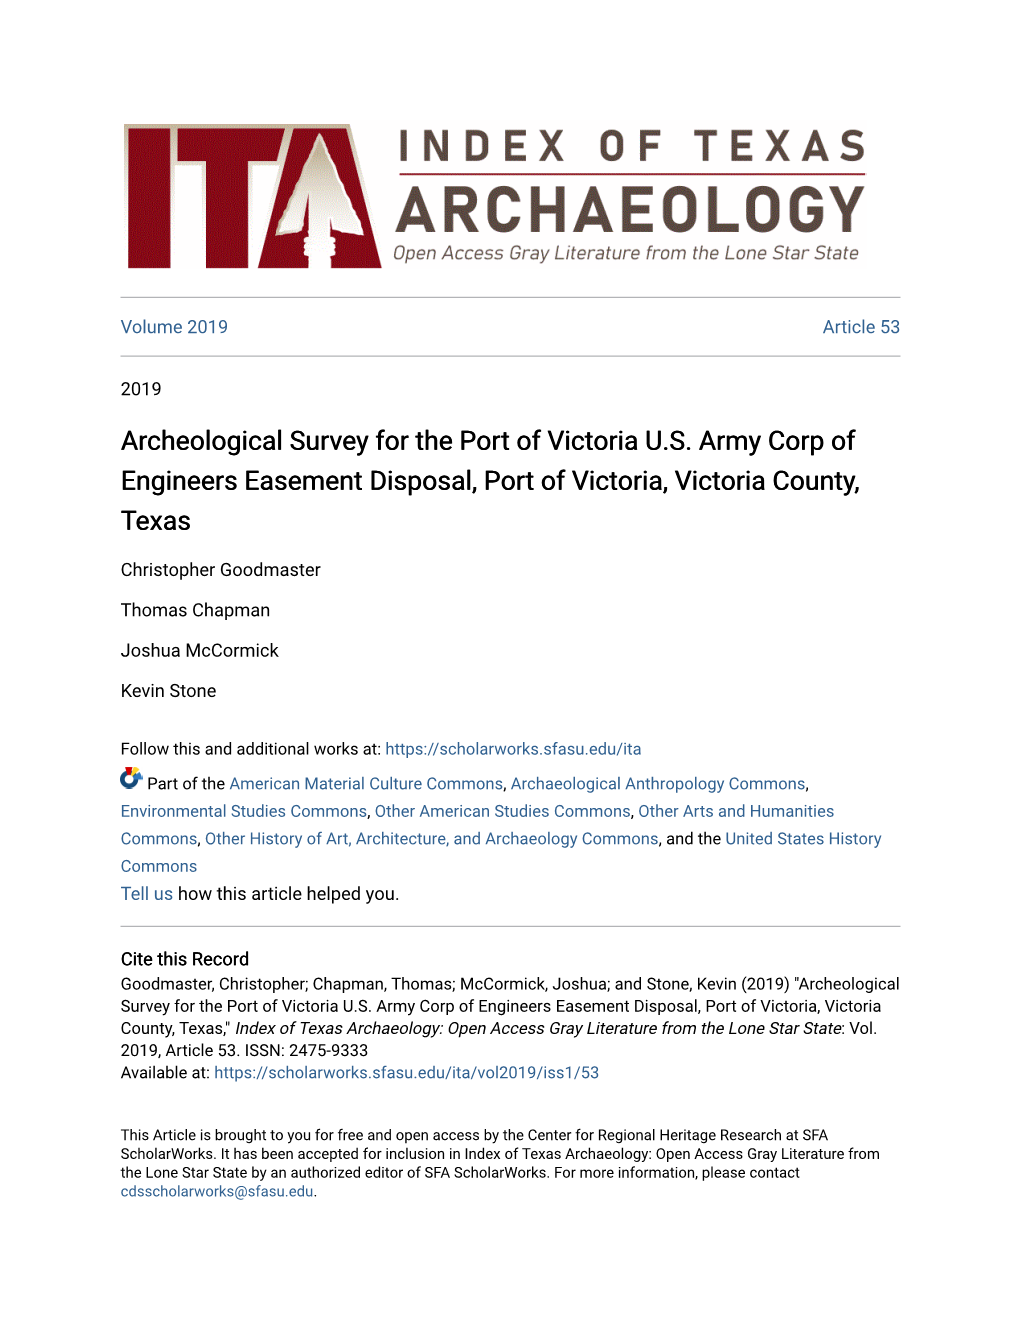 Archeological Survey for the Port of Victoria US Army Corp of Engineers